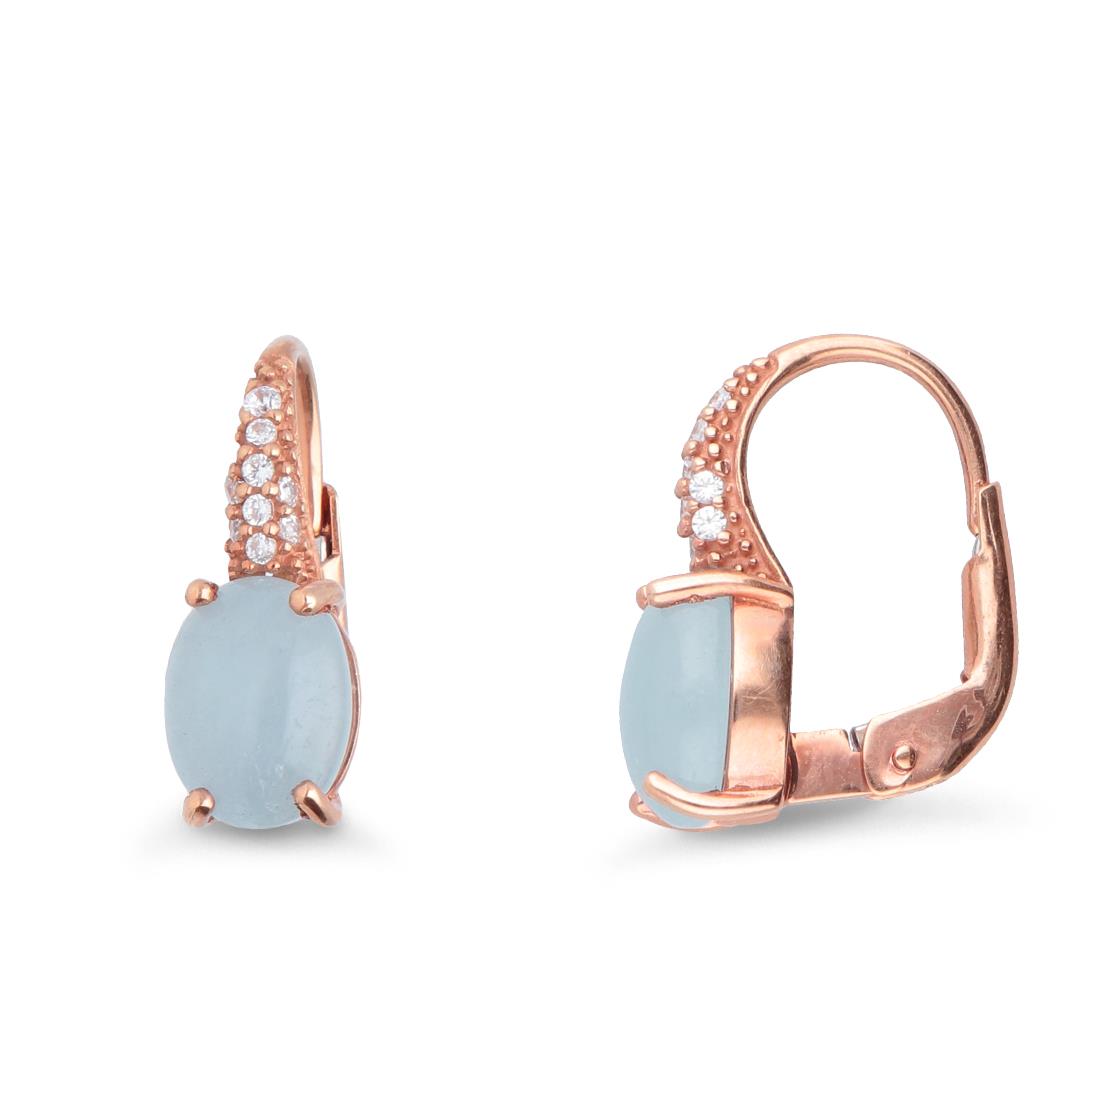 Rose gold earrings with cubic zirconia and quartz - ORO&CO